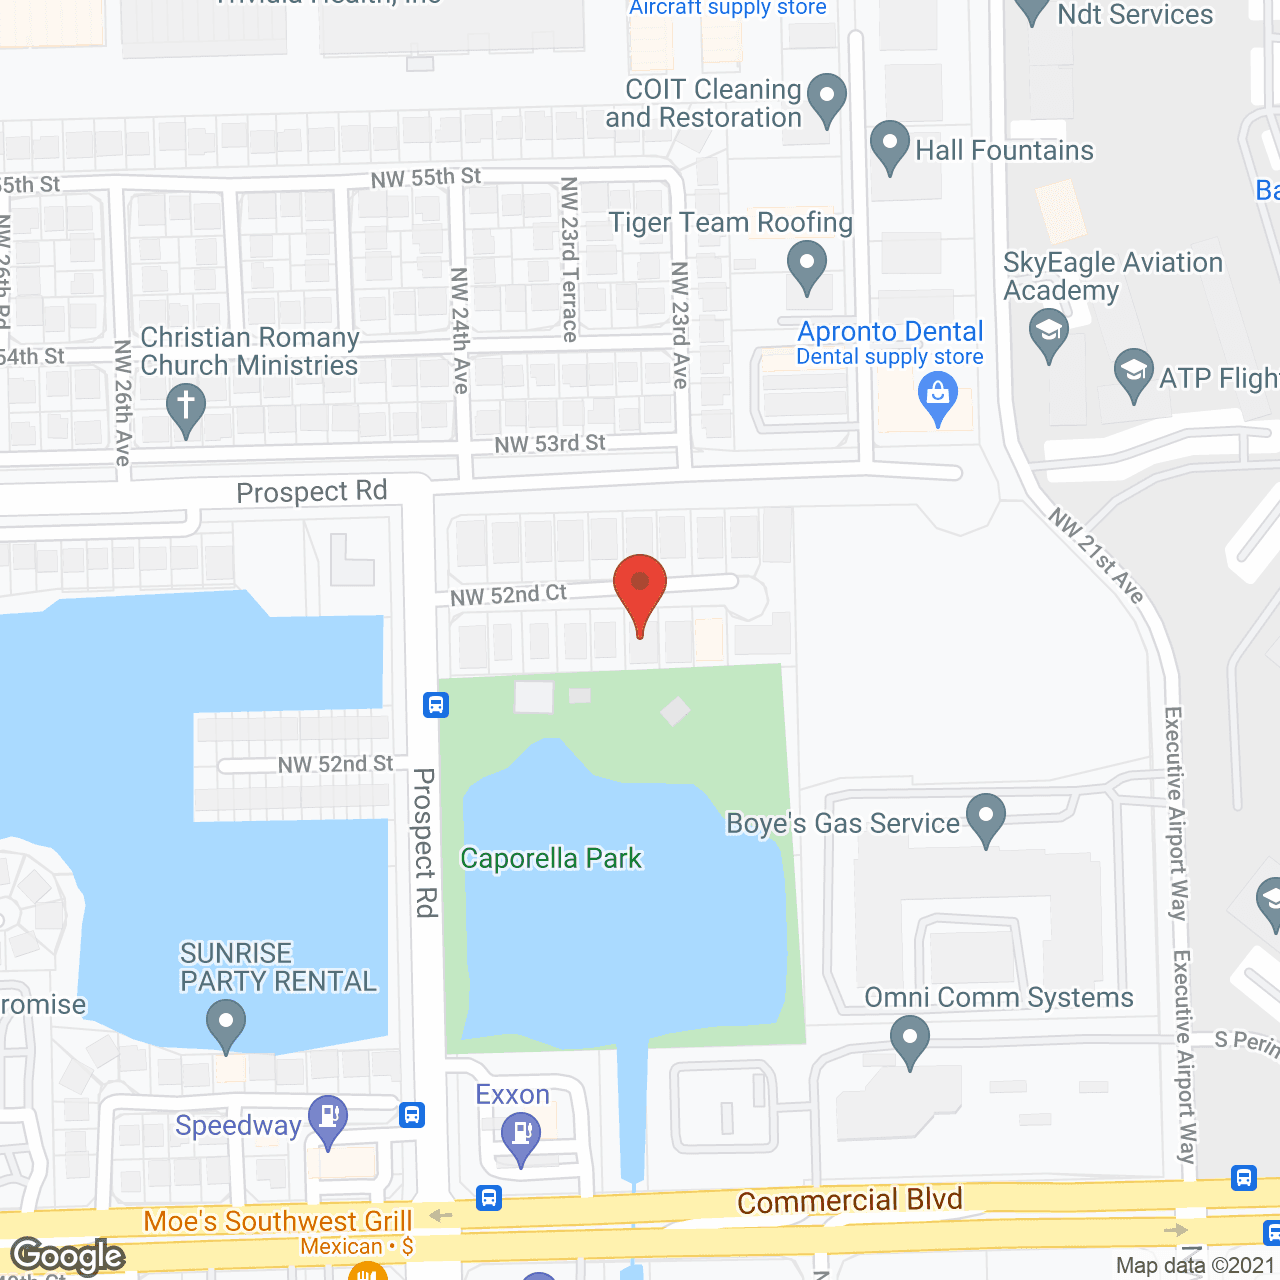 Lakeview Retirement Residence in google map